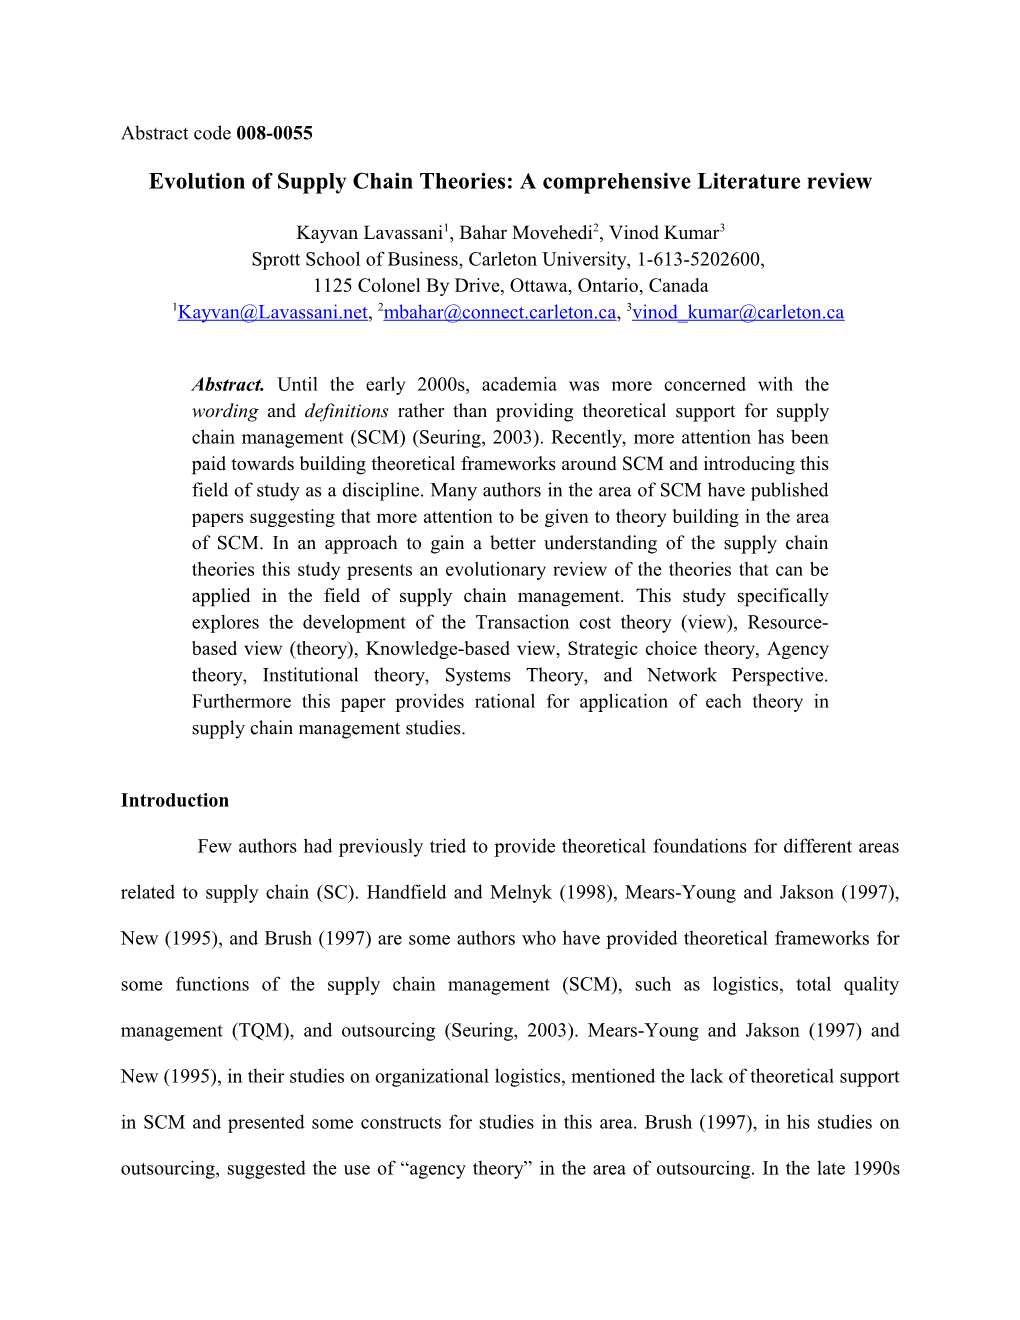 Evolution of Supply Chain Theories: a Comprehensive Literature Review